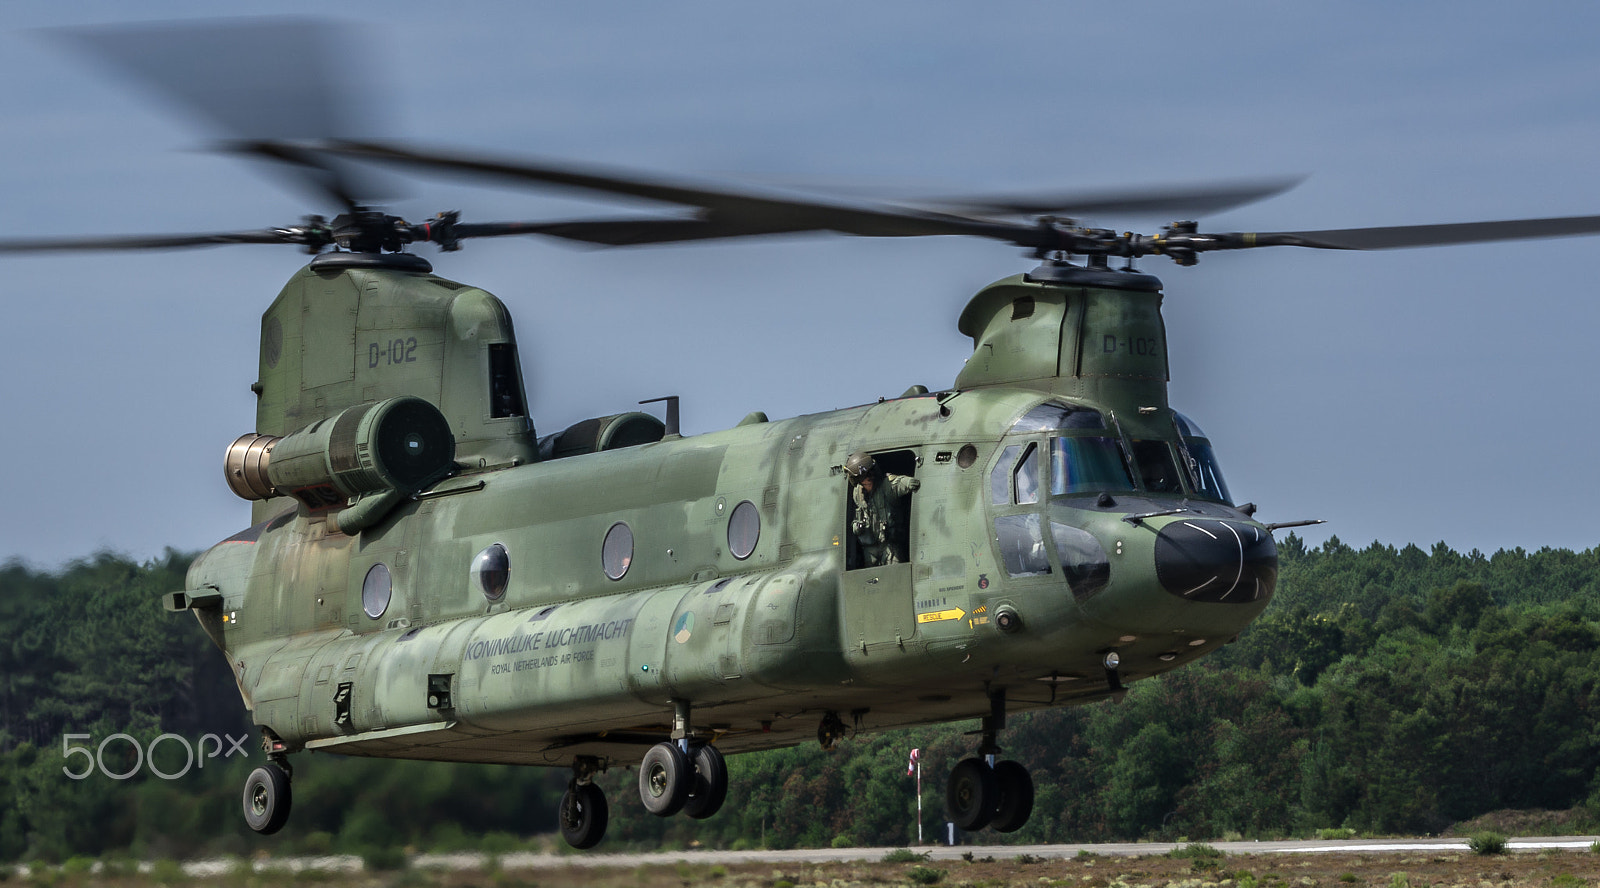 Nikon D5100 sample photo. Boeing ch-47d chinook d-102 photography